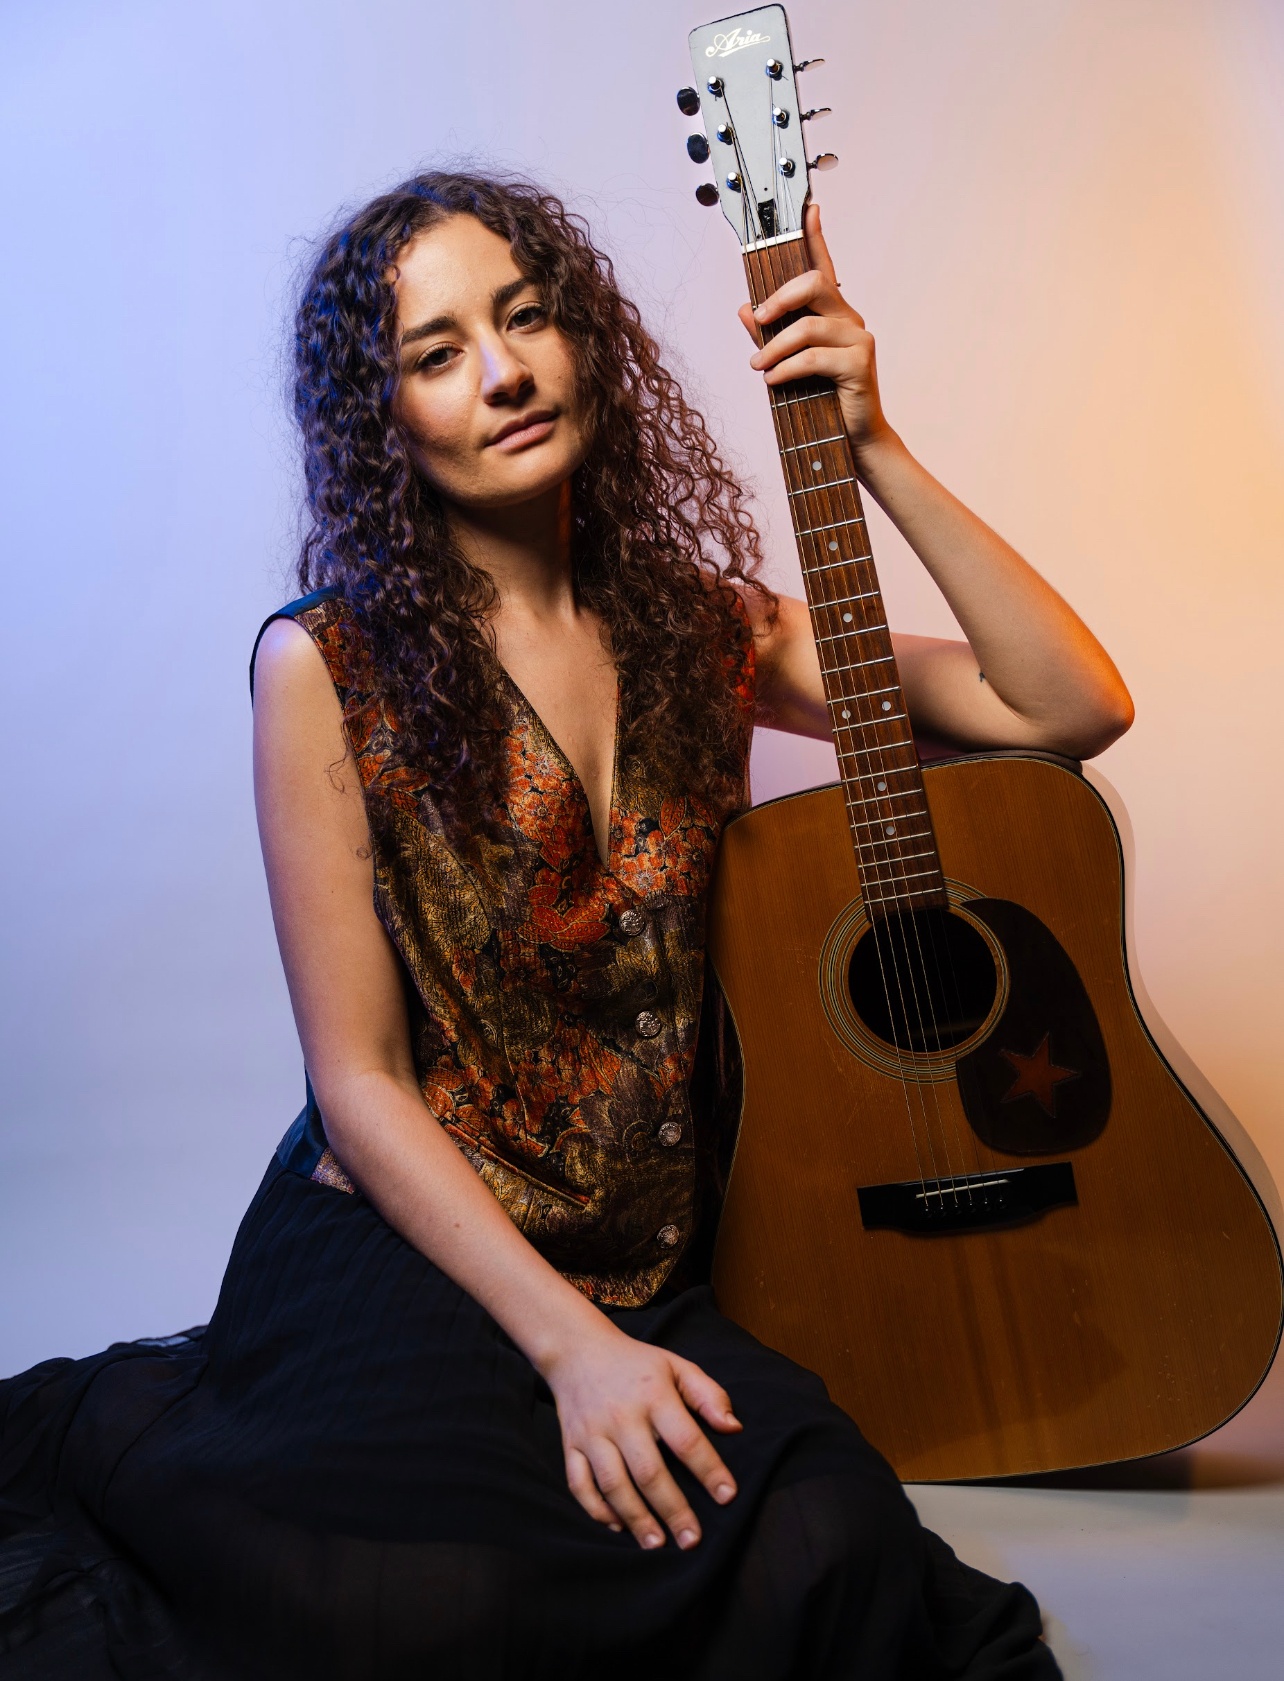 A white woman with curly brown hair falling below her shoulders looks at us contentendly while holding a guitar up at her side. She wears a silk vest with a shimmering deep brown and orange pattern. Behind her a wall is lit in purple and orange light.